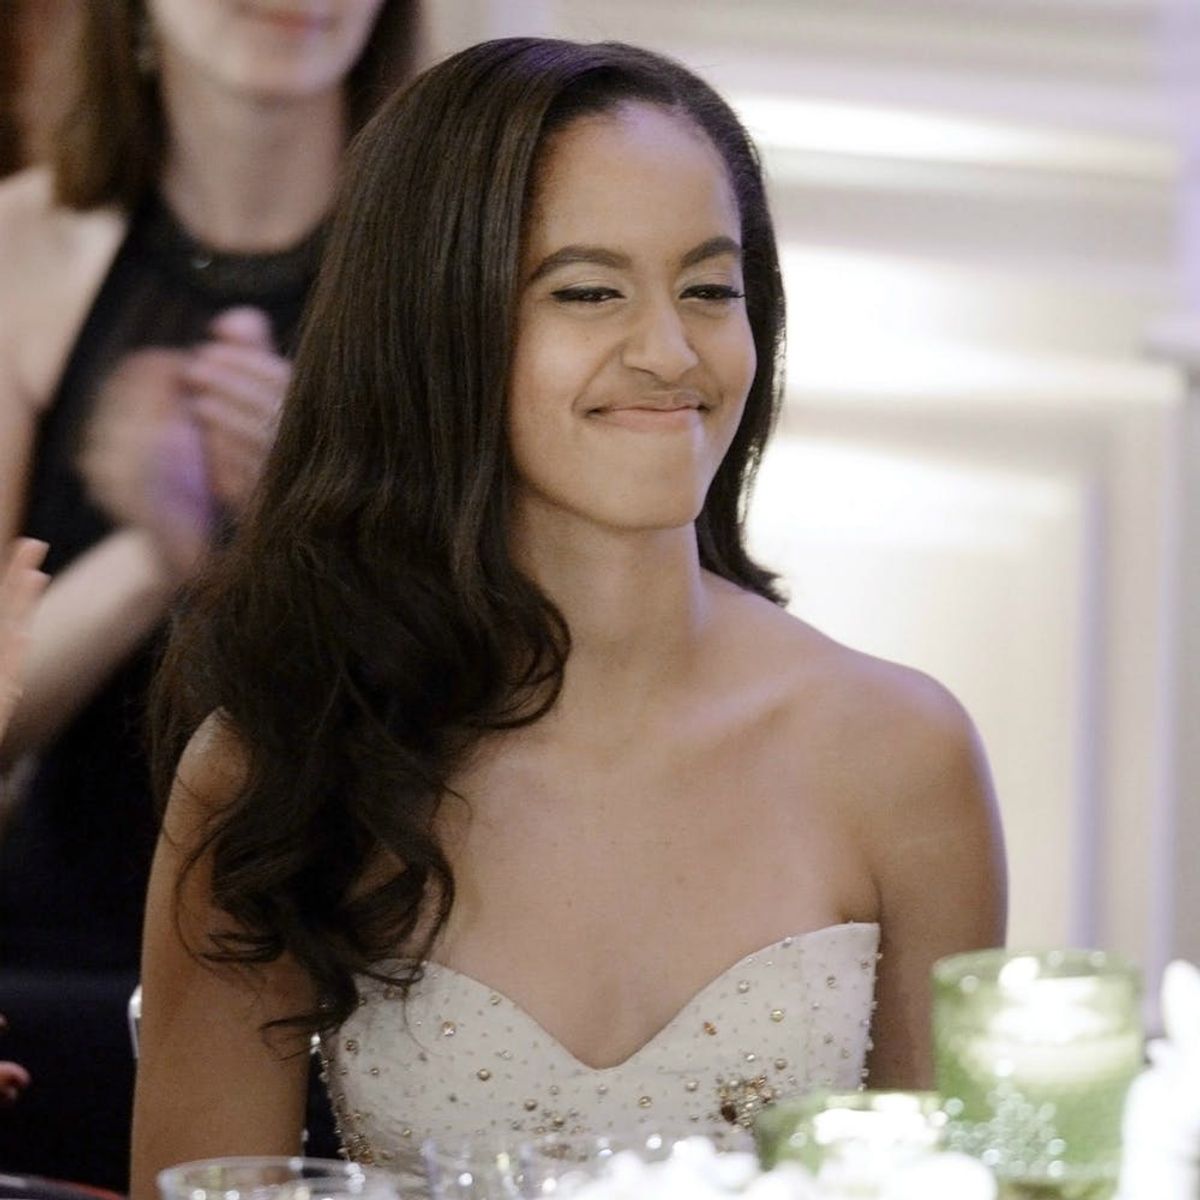 It’s Official: Malia Obama Is Headed to Harvard